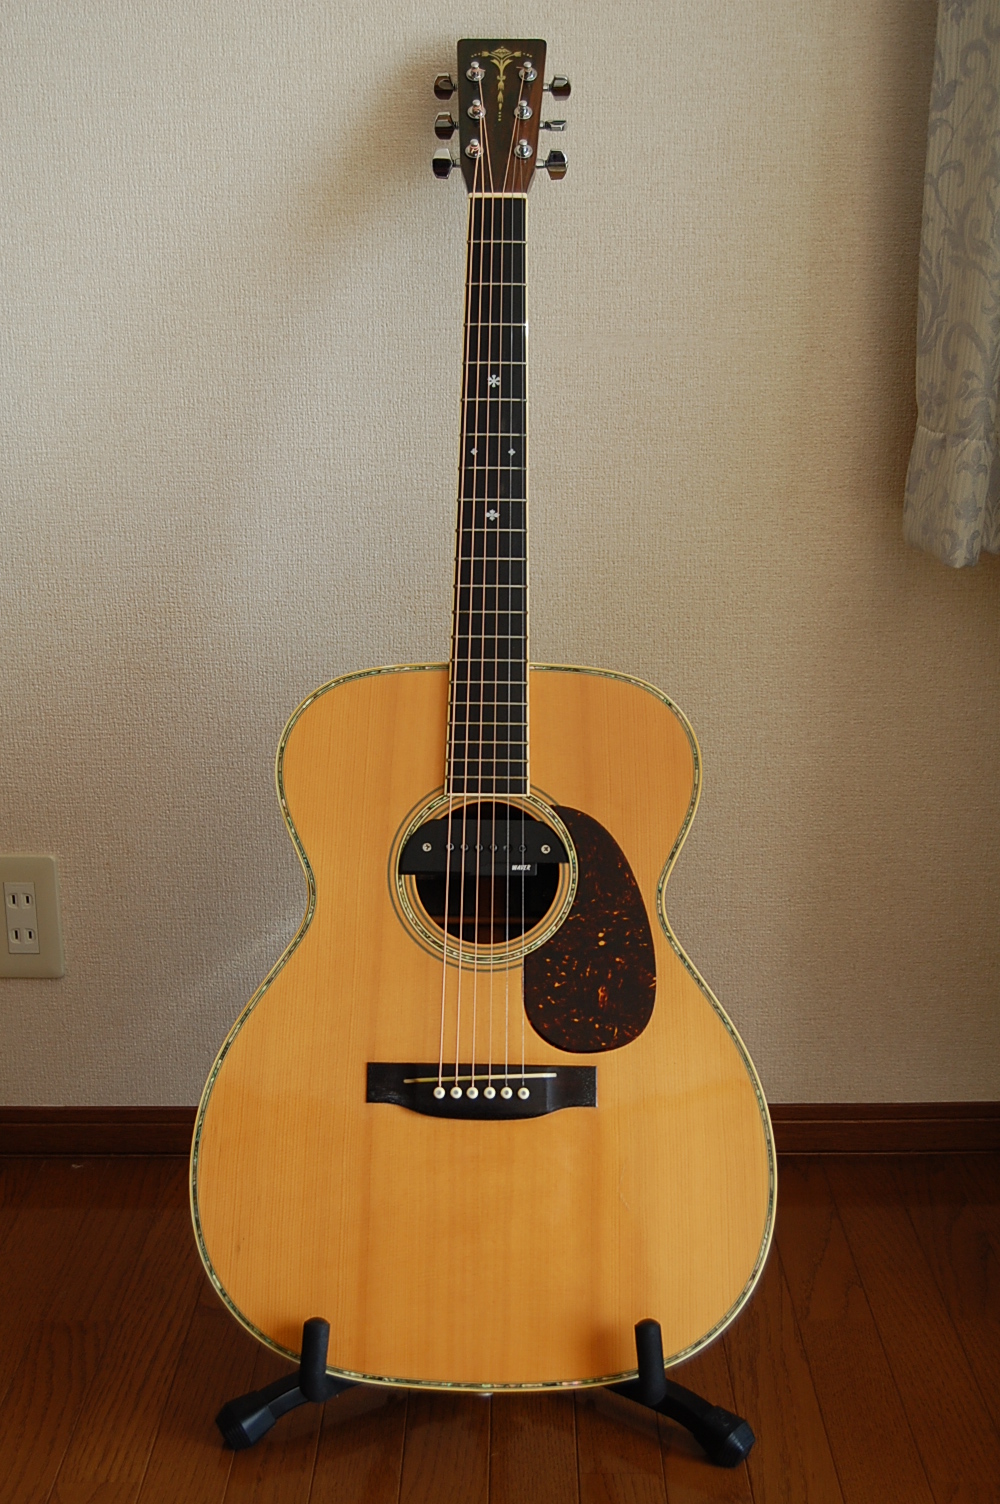 Cat's Eye CE-2000S│Acoustic Guitar Homepage